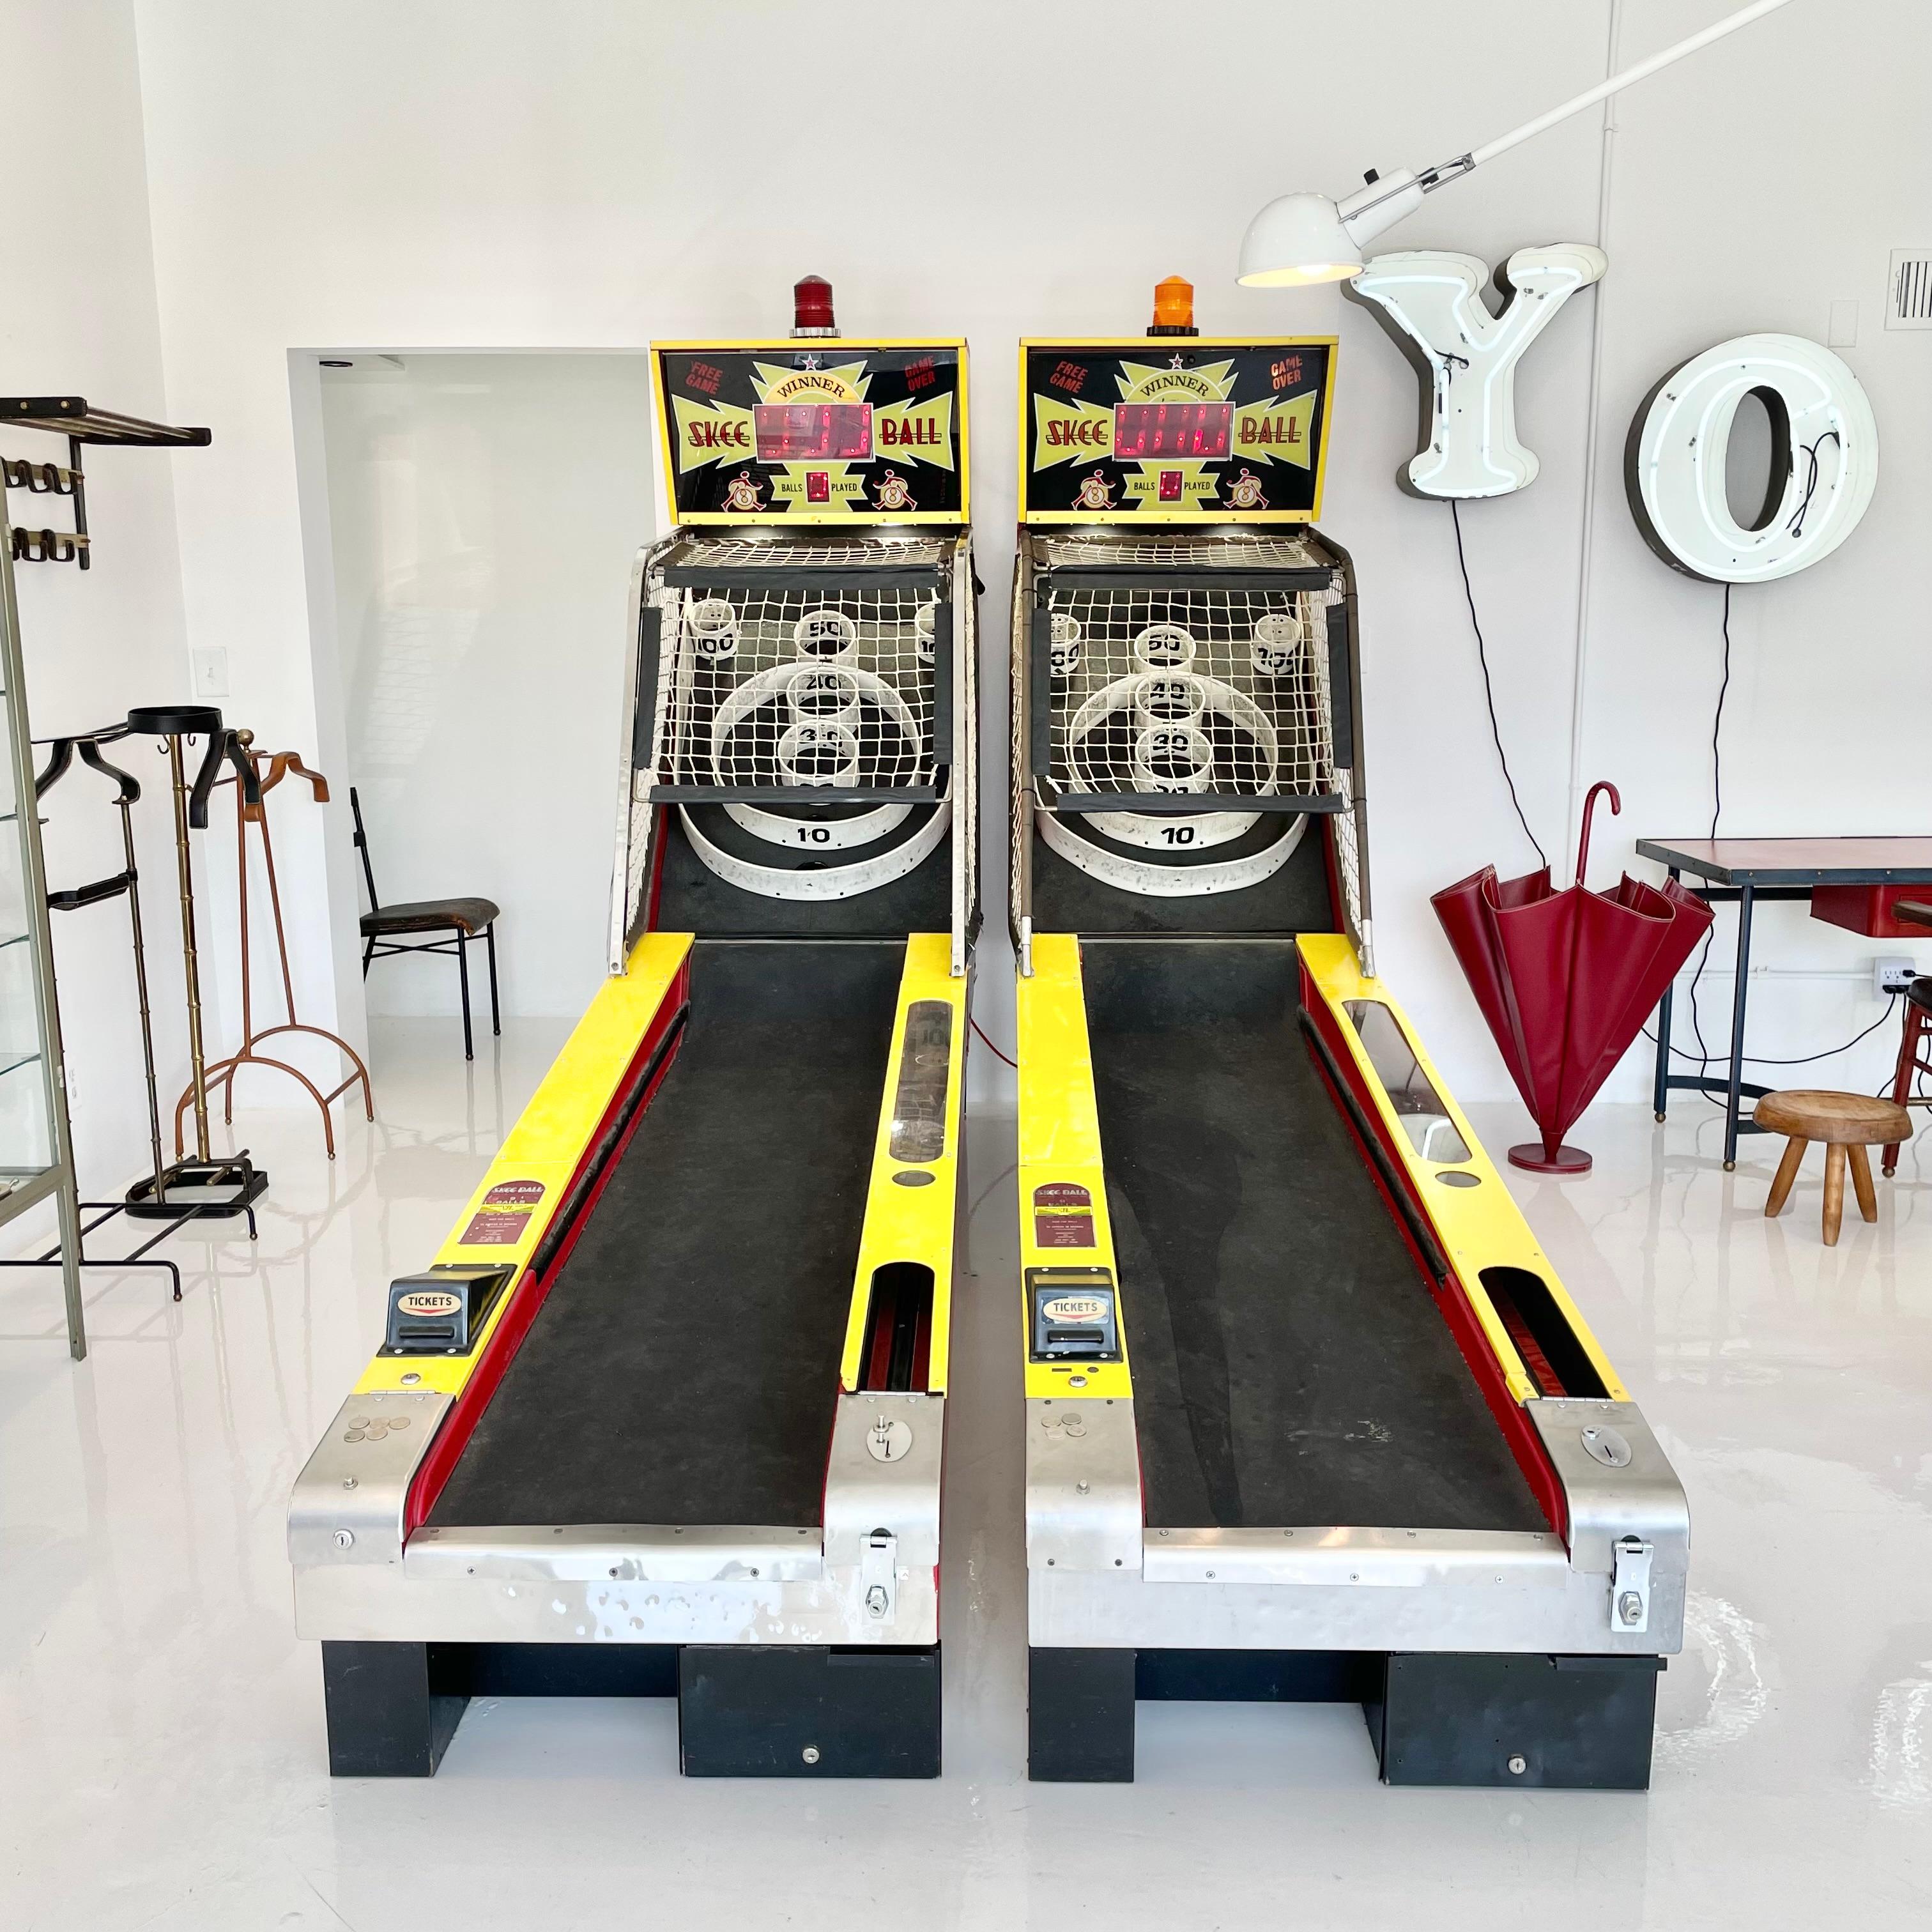 Cool vintage Skee-Ball machine in great working condition. 9 vintage wood balls included. Coin-operated with light up scoreboard. Ball alley is topped with a resilient black rubber that is still in great condition and helps preserve the life of the